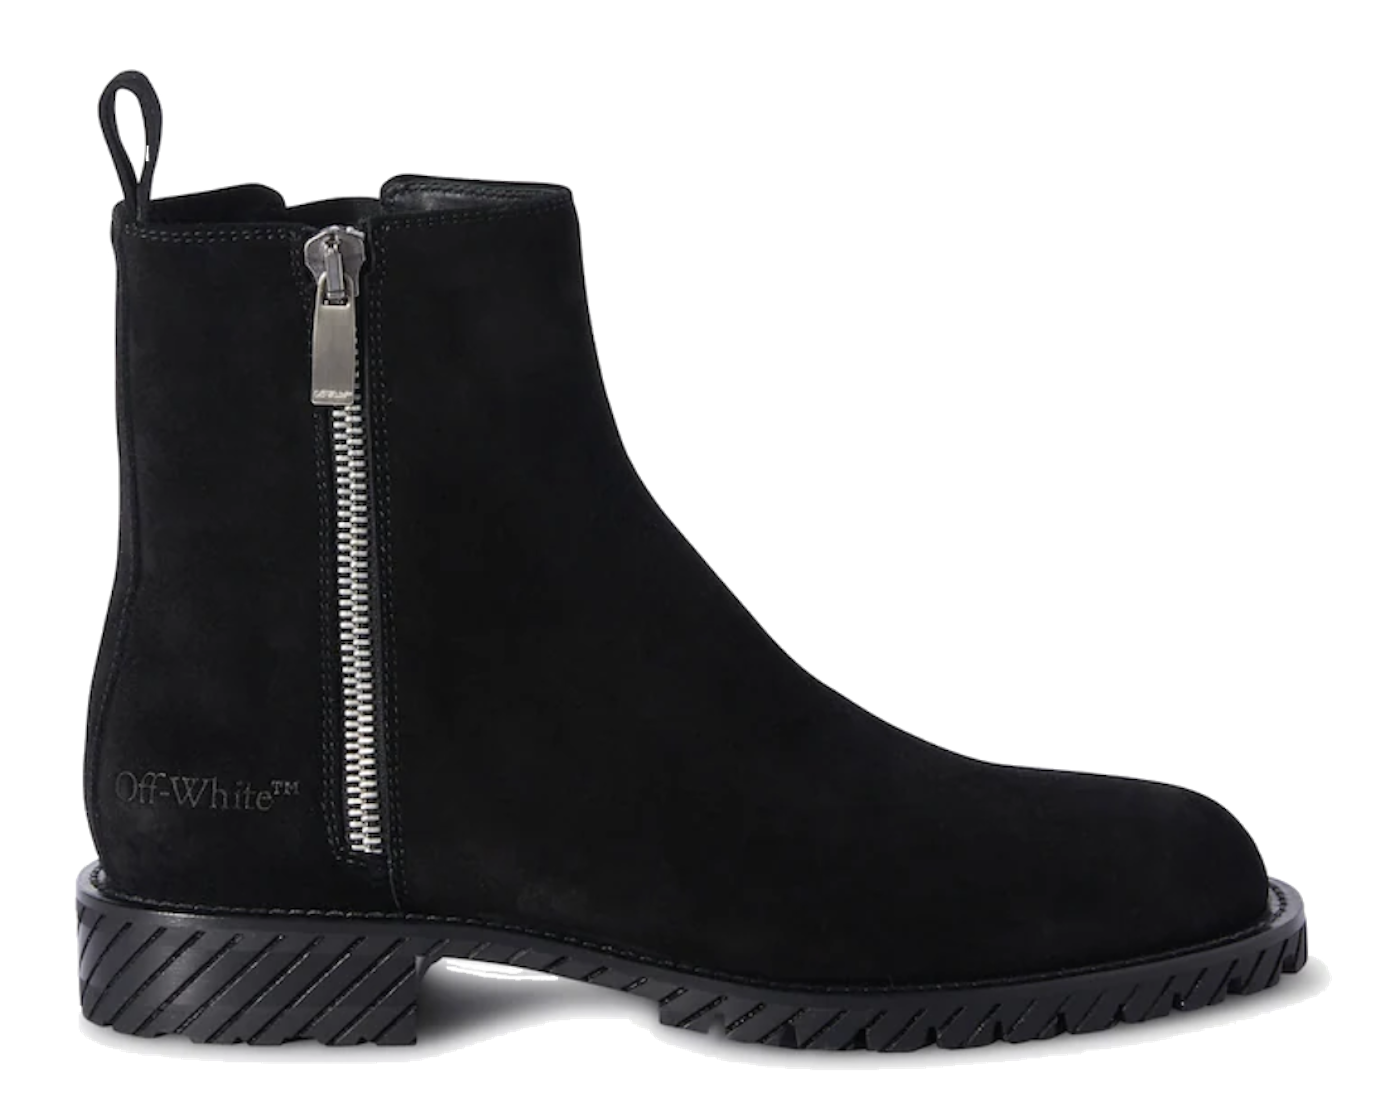 OFF WHITE COMBAT ANKLE BOOT SUEDE BLACK